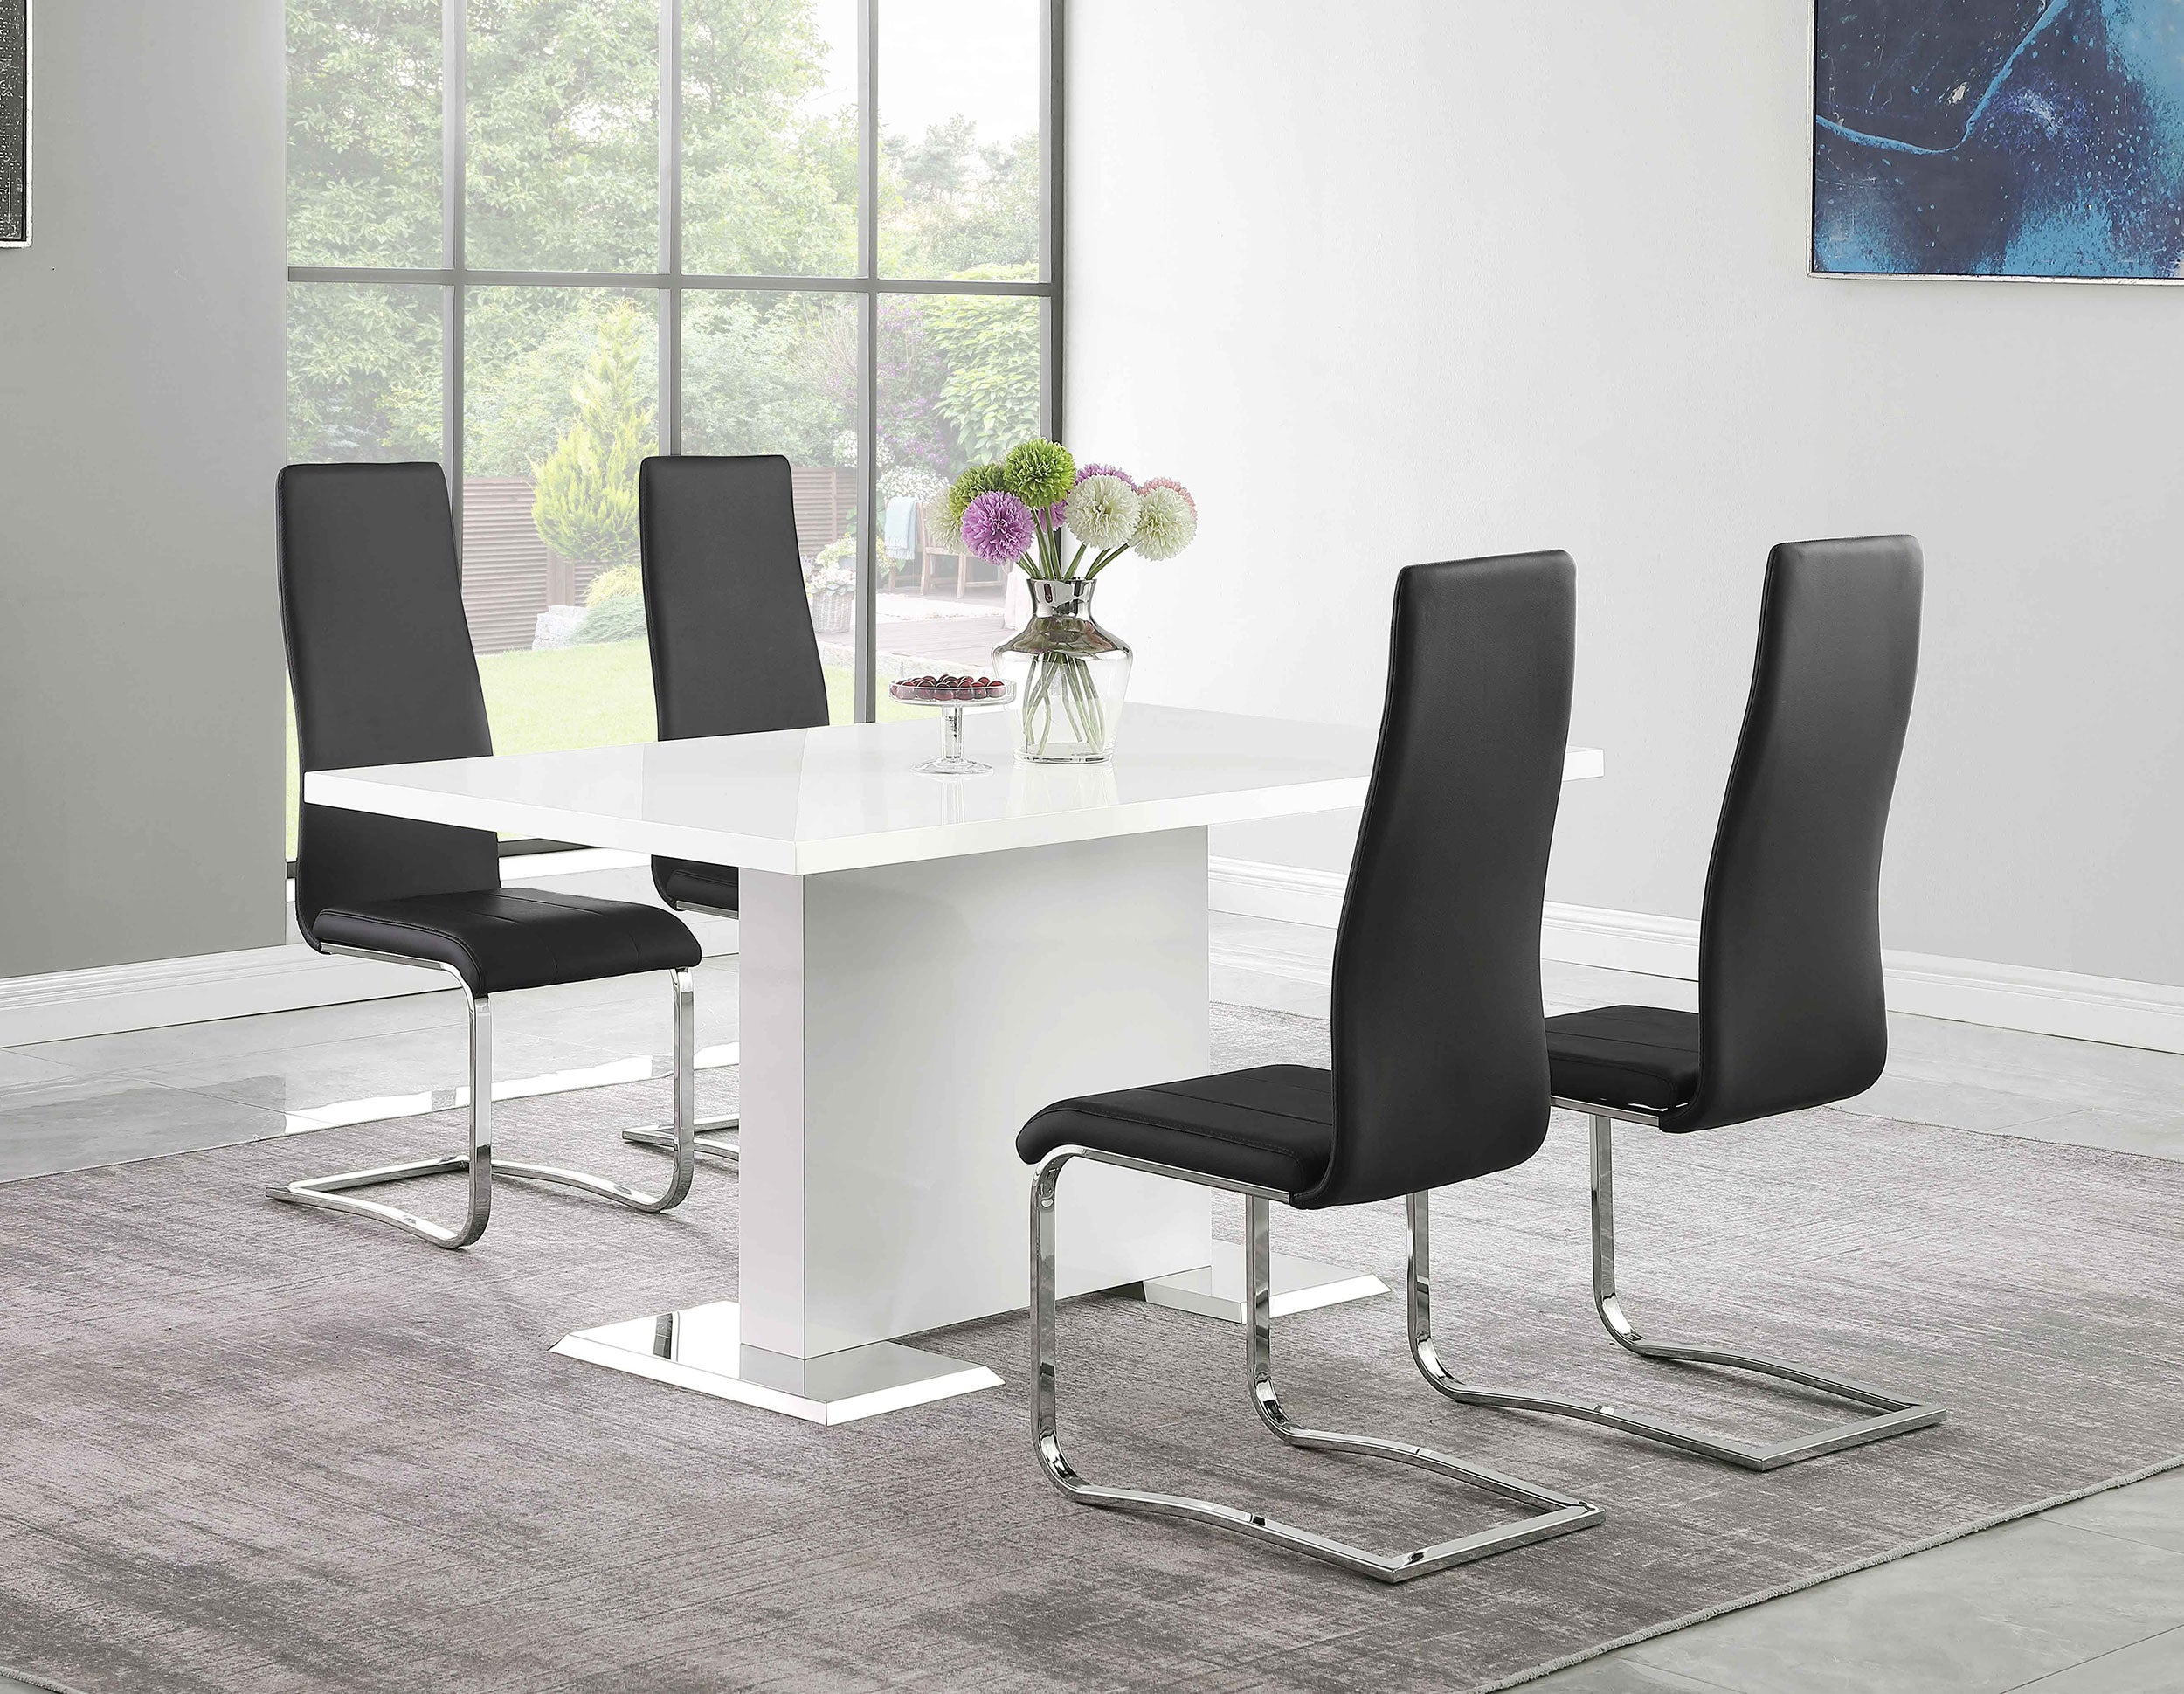 5 PC Contemporary High Gloss White Dining Room Set Black Leatheratte Chairs